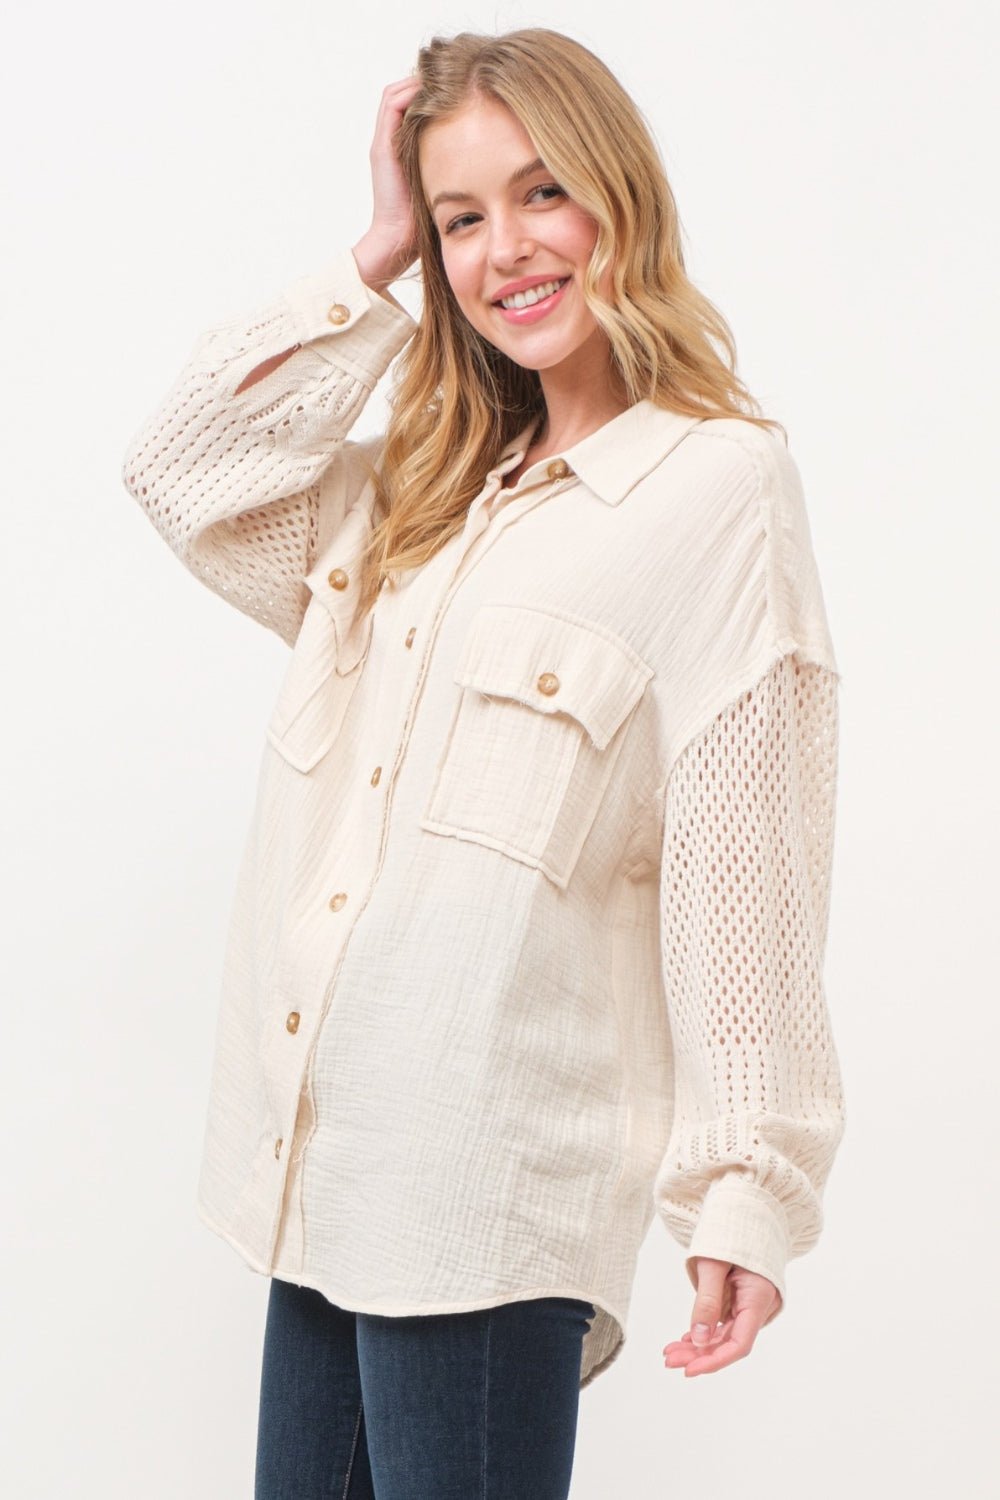 Textured Button Up Crochet Sleeve Shirt in CreamShirtAnd the Why